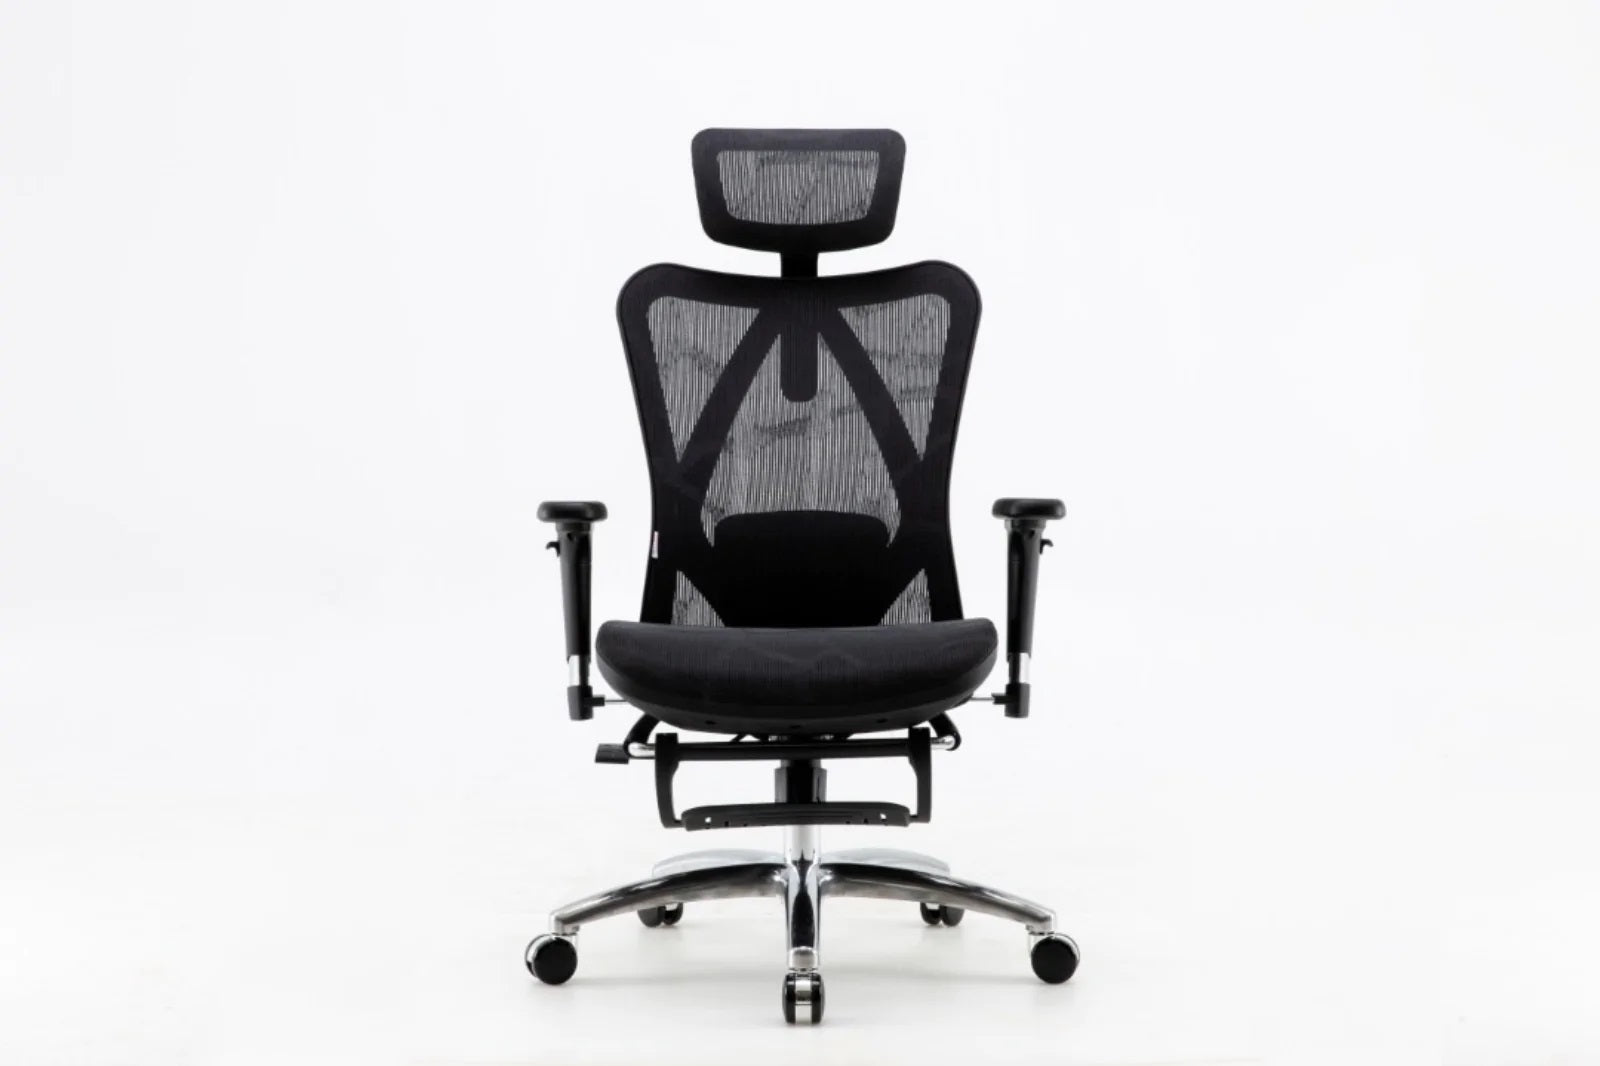 Sihoo M57 Ergonomic Office Chair with built-in footrest